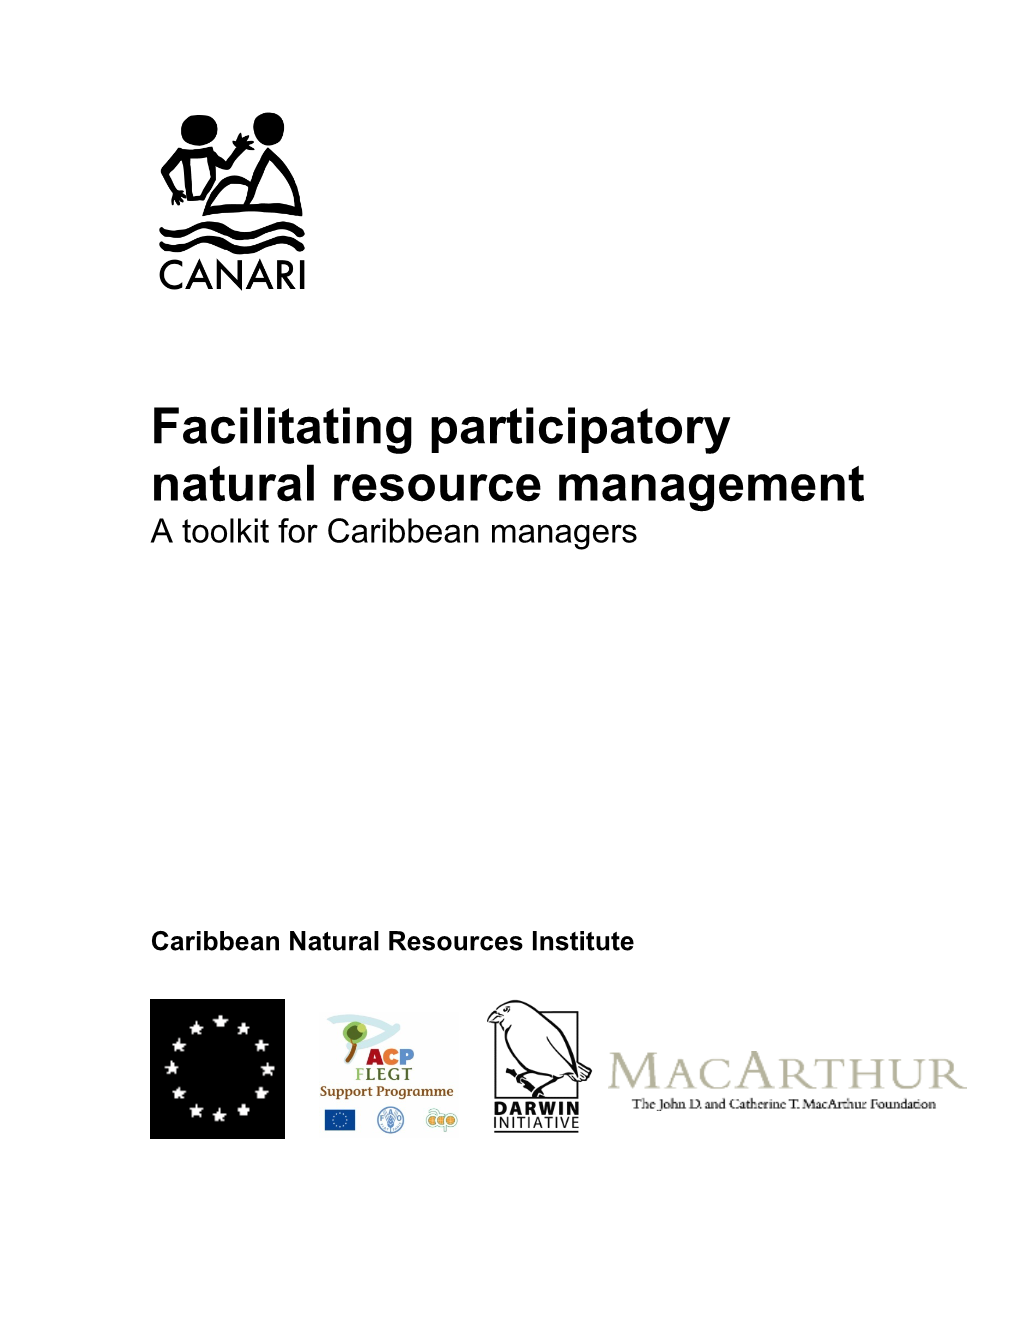 Facilitating Participatory Natural Resource Management a Toolkit for Caribbean Managers